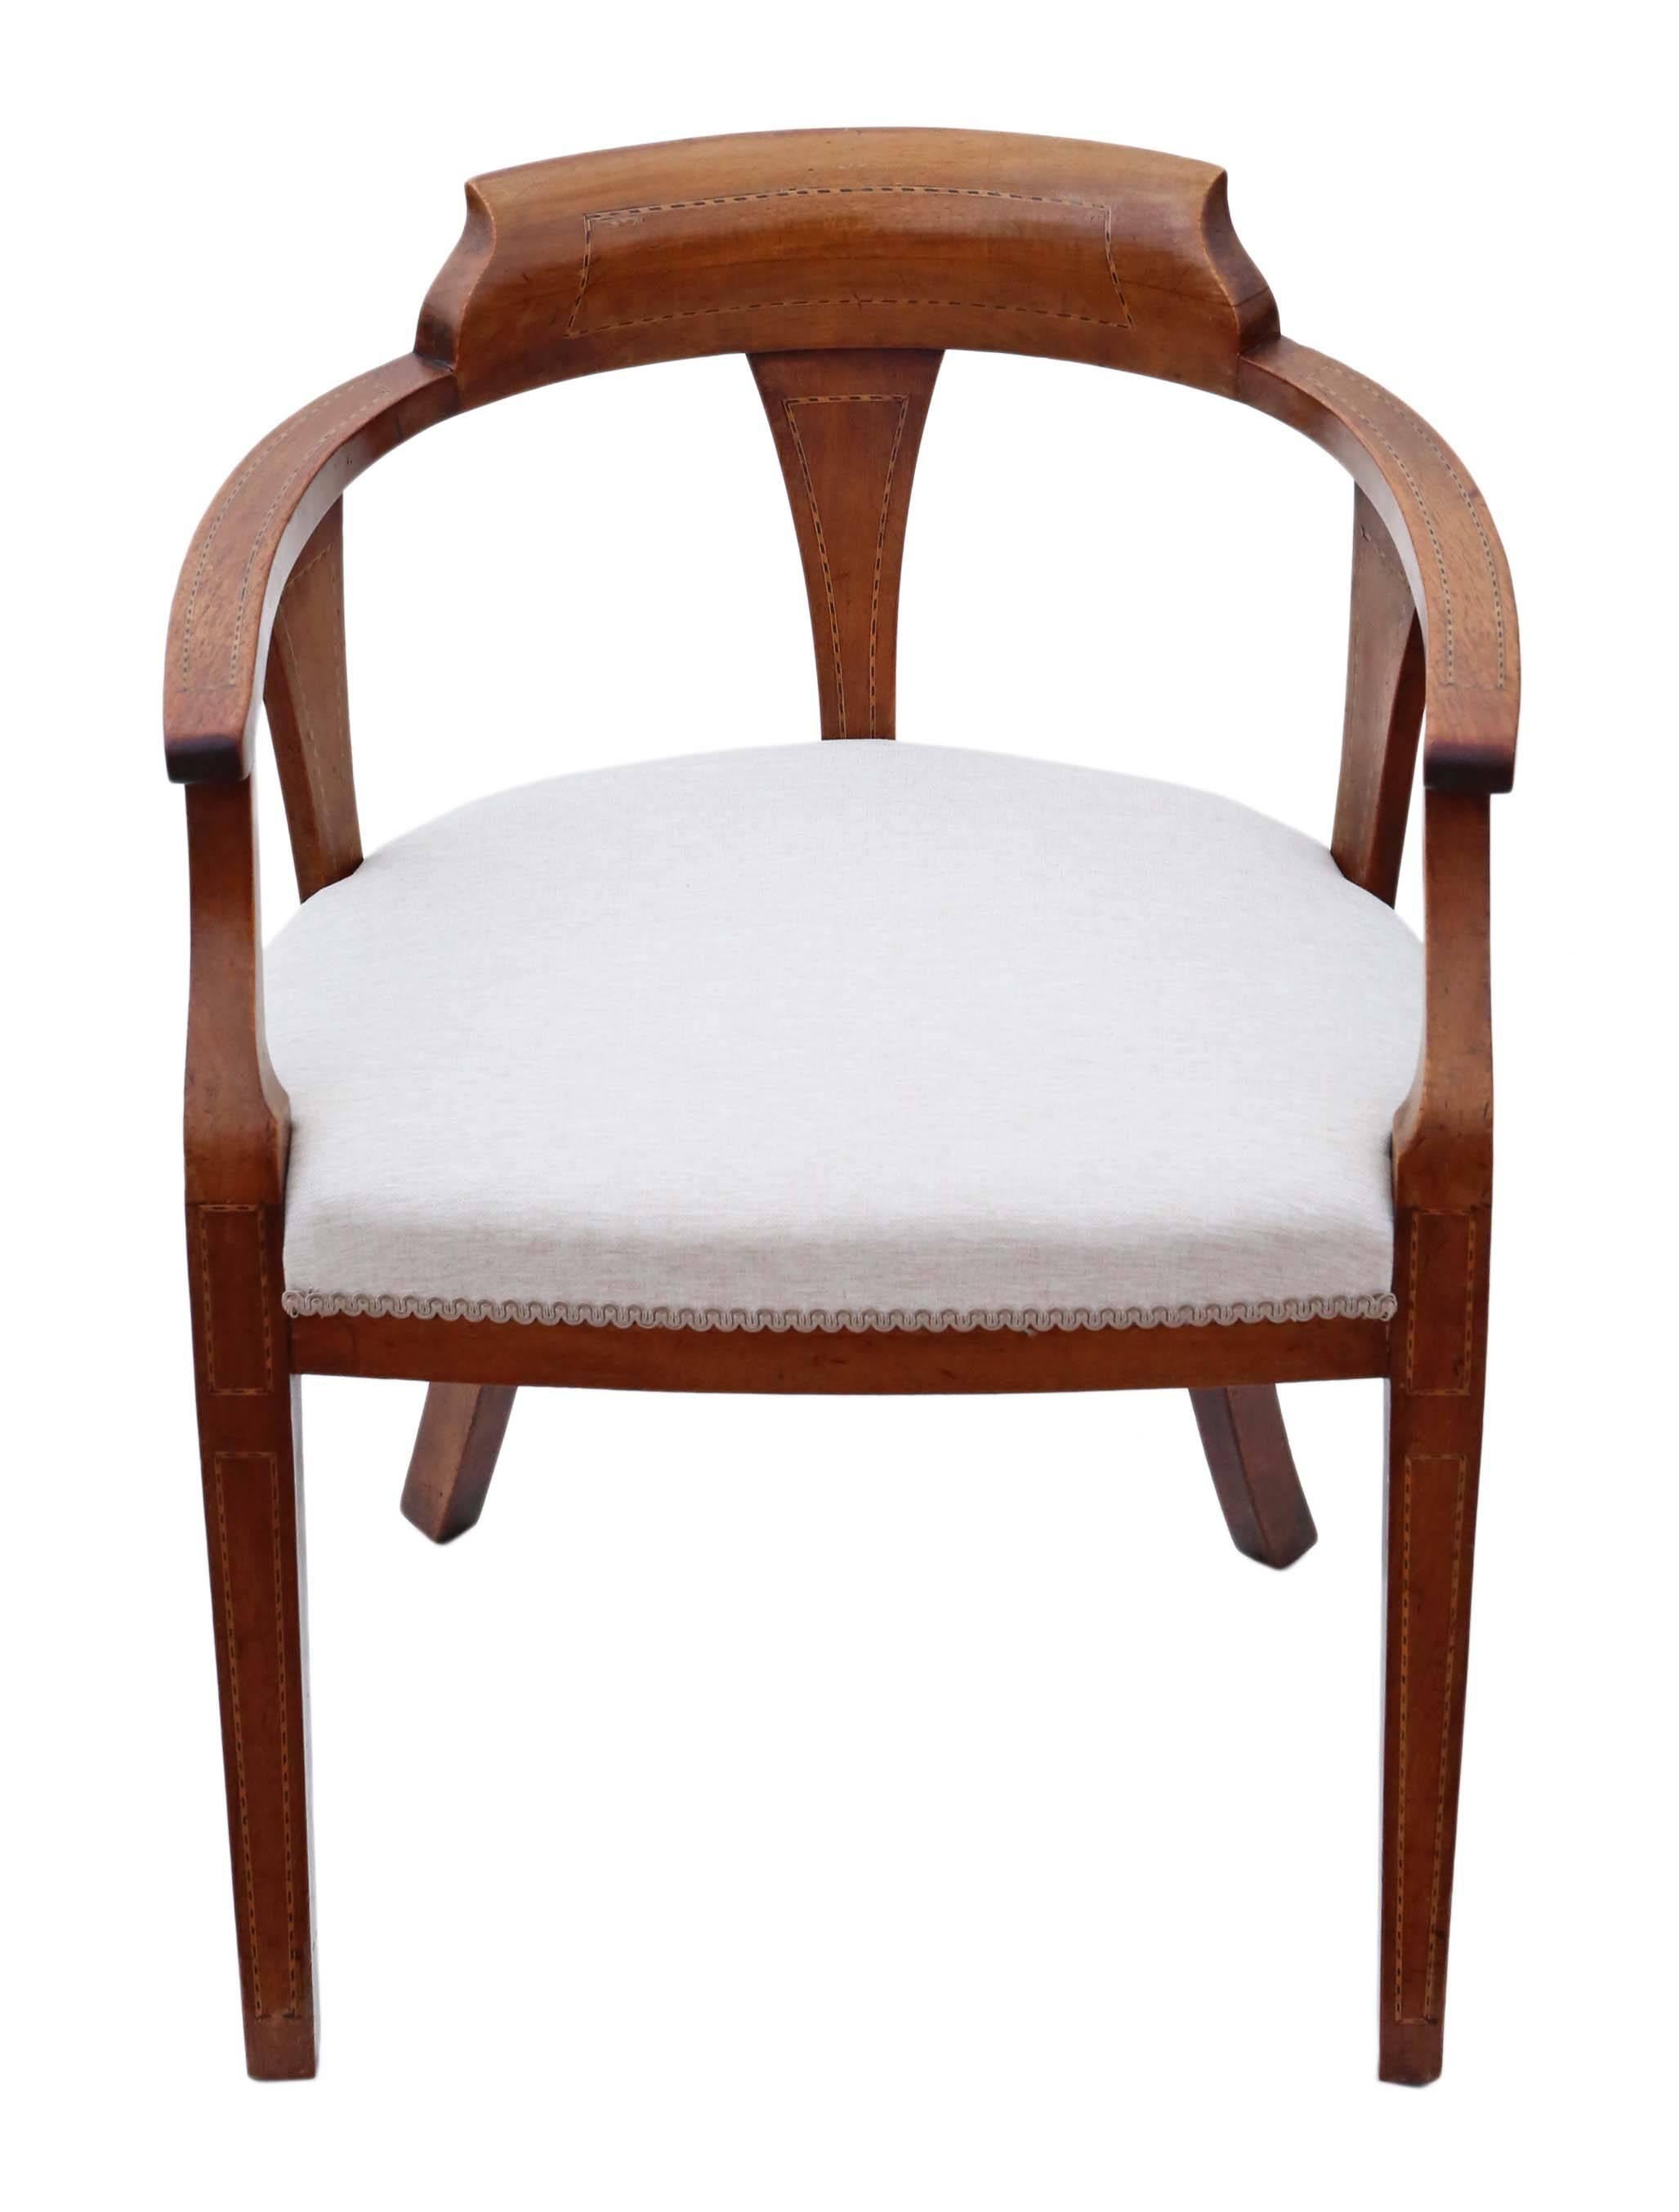 Antique quality Edwardian inlaid mahogany tub armchair, great for a corner or bedroom.

A great rare find, with lovely proportions and styling.

A sought after style of chair.

Lovely color, age, patina and charm.

Re-upholstered in a heavy